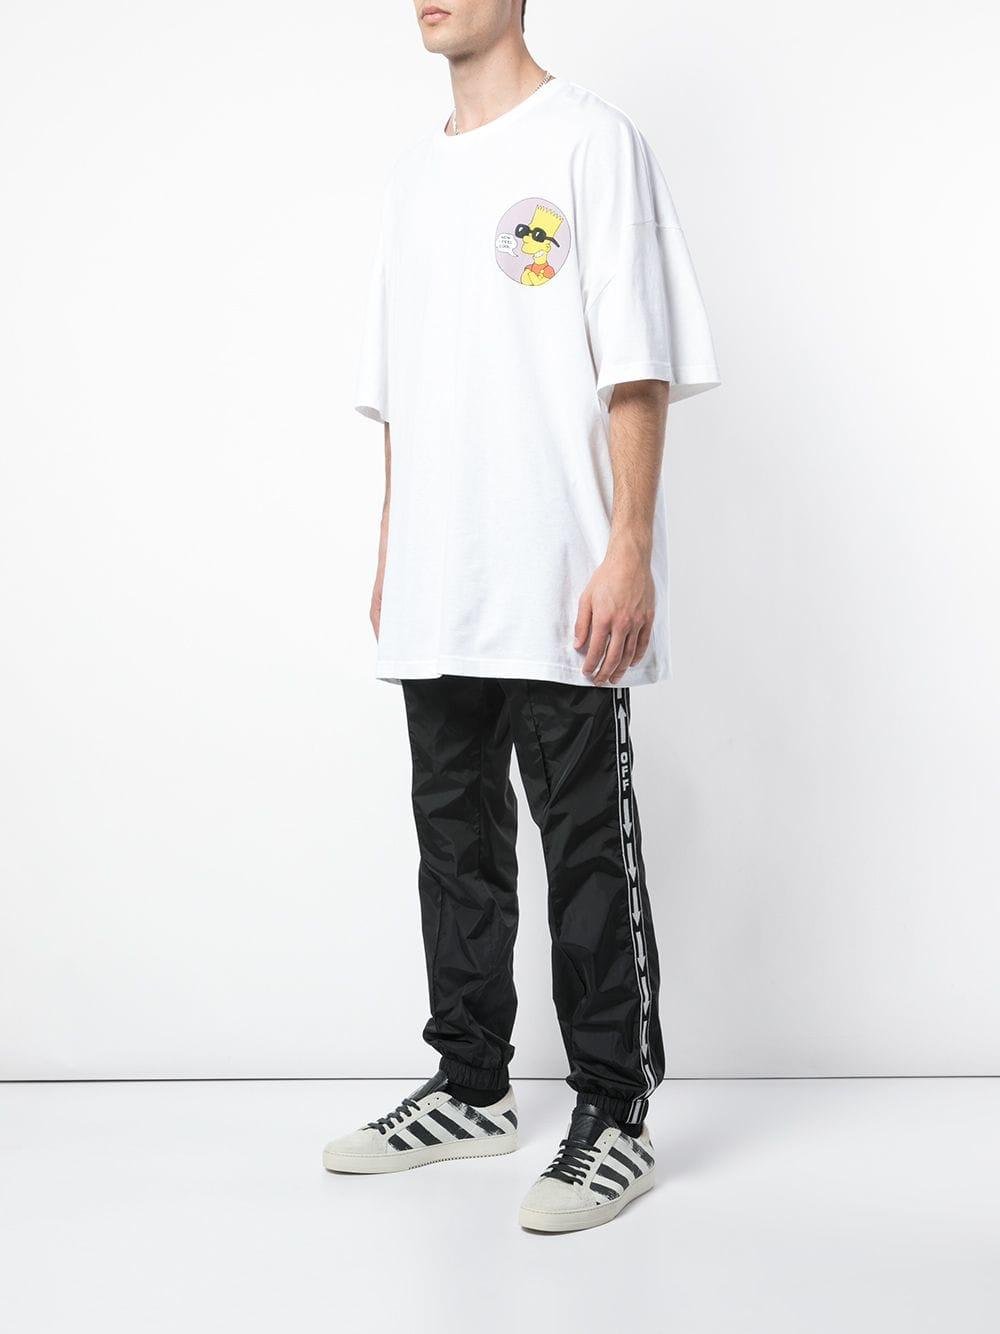 Disconnection Last Wait a minute Off-White c/o Virgil Abloh Oversized Bart Simpson T-shirt in White for Men  | Lyst